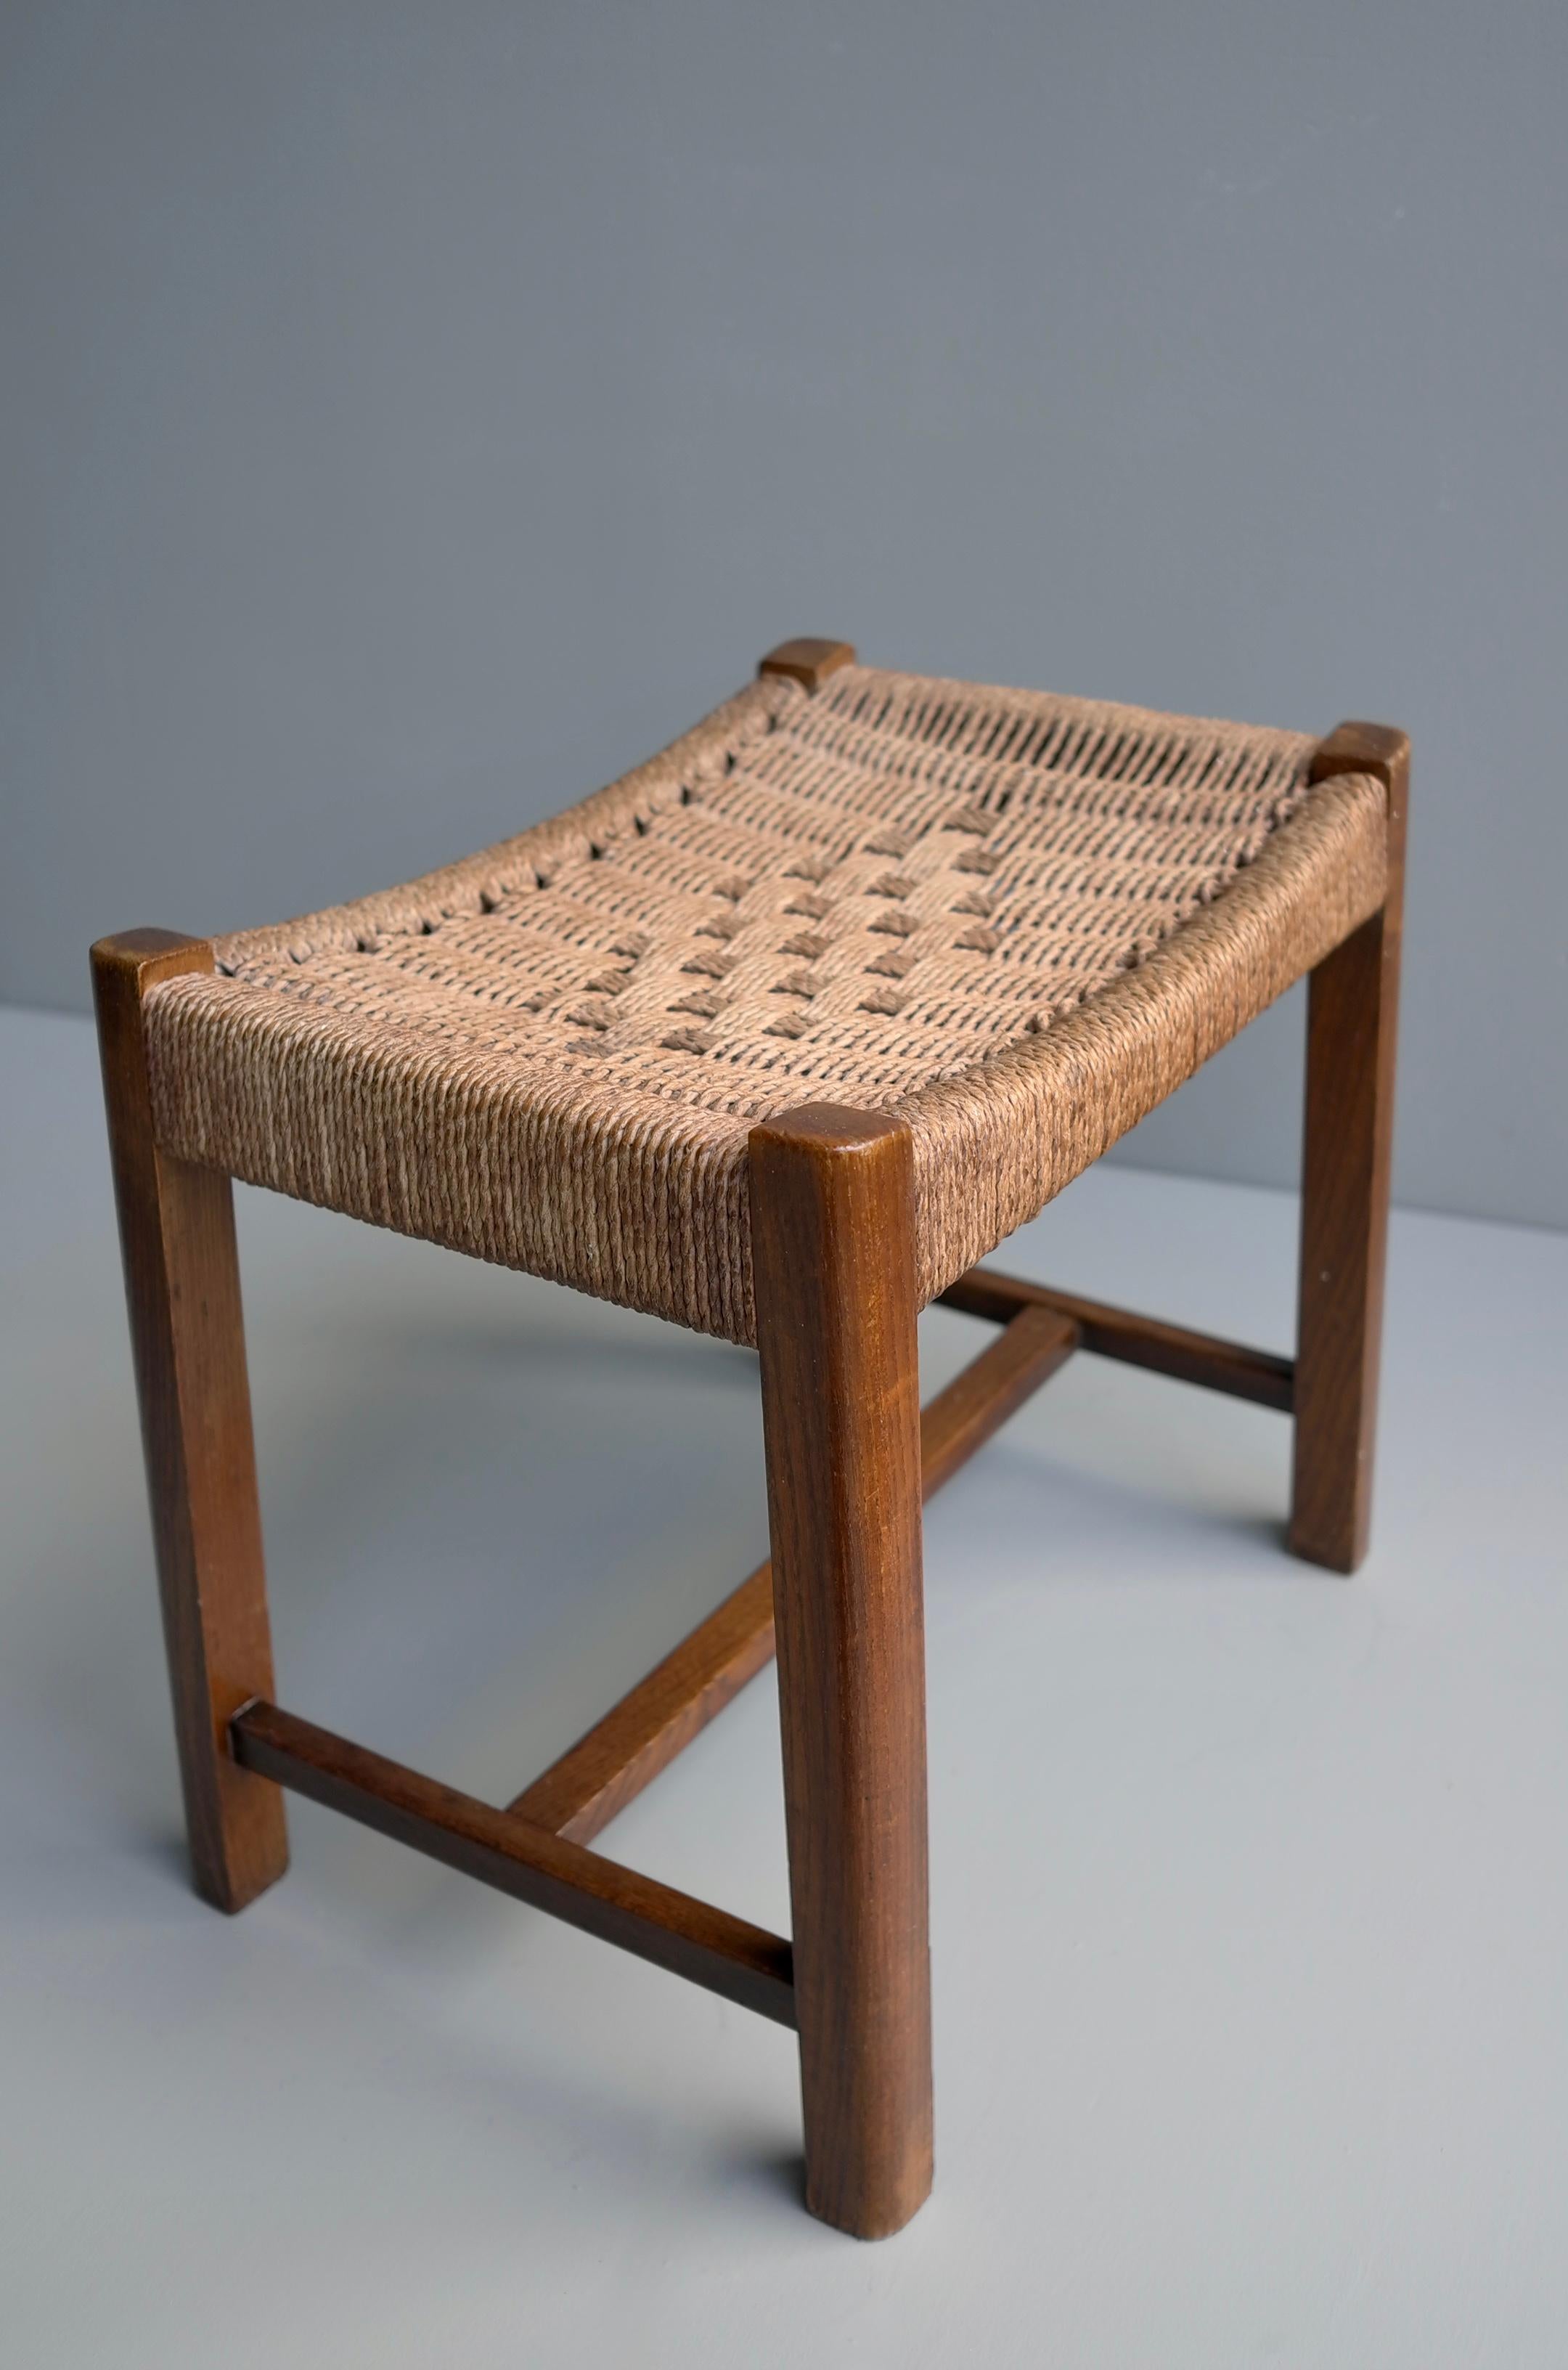 Oak and woven rope stool by Audoux Minet France 1950s.